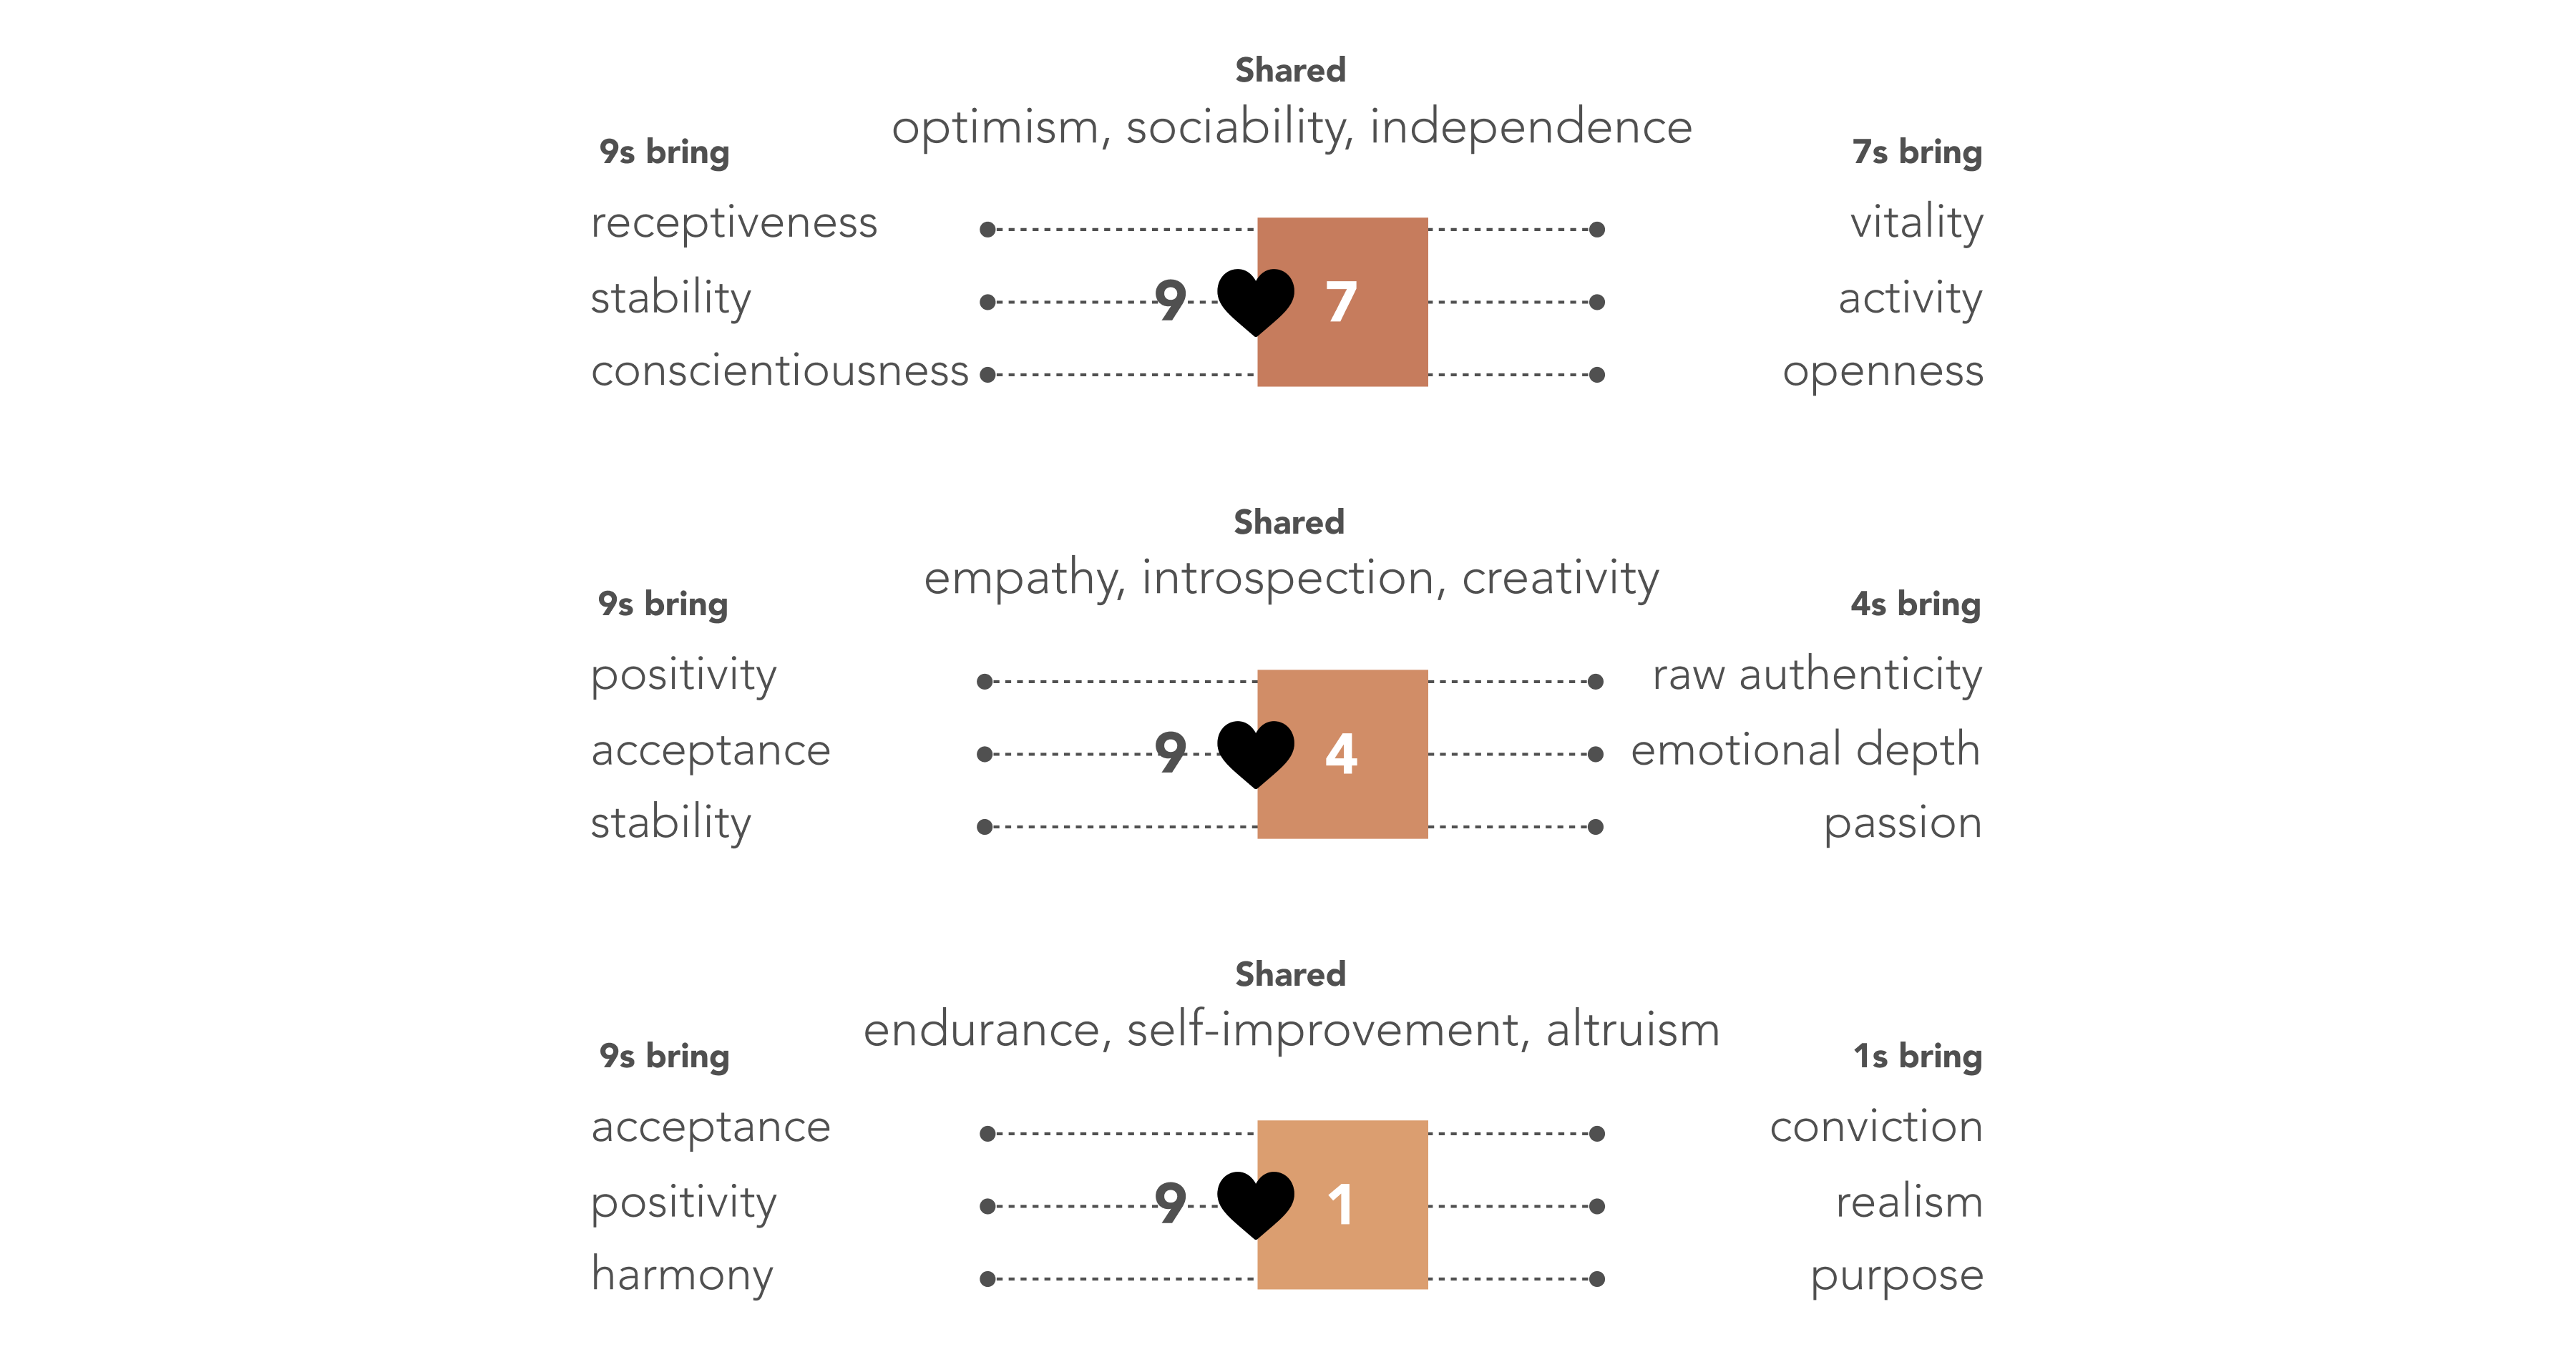 9s and 7s share optimism, sociability, independence. 9s bring receptiveness, stability, conscientiousness, while 7s bring vitality, activity, openness. 9s and 4s share empathy, introspection, creativity. 9s bring positivity, acceptance, stability, while 4s bring raw authenticity, emotional depth, passion. 9s and 1s share endurance, self-improvement, altruism. 9s bring acceptance, positivity, harmony, while 1s bring conviction, realism, purpose.